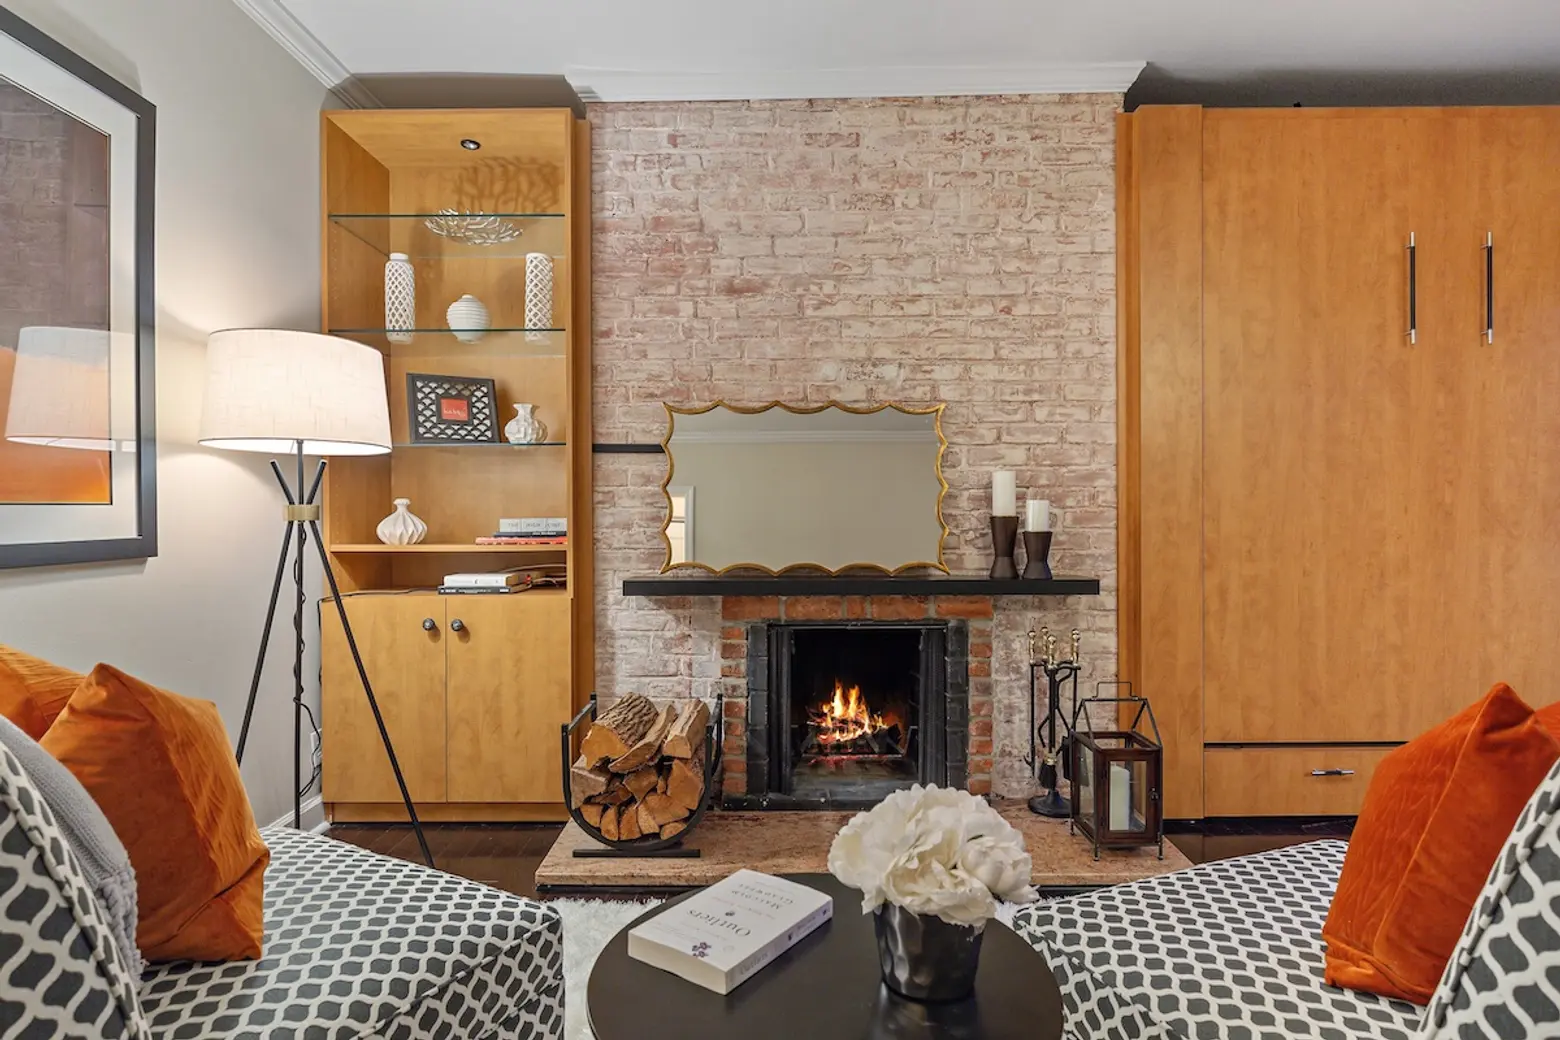 St. Mark’s studio with a working fireplace is a cozy little slice of East Village life for $475K